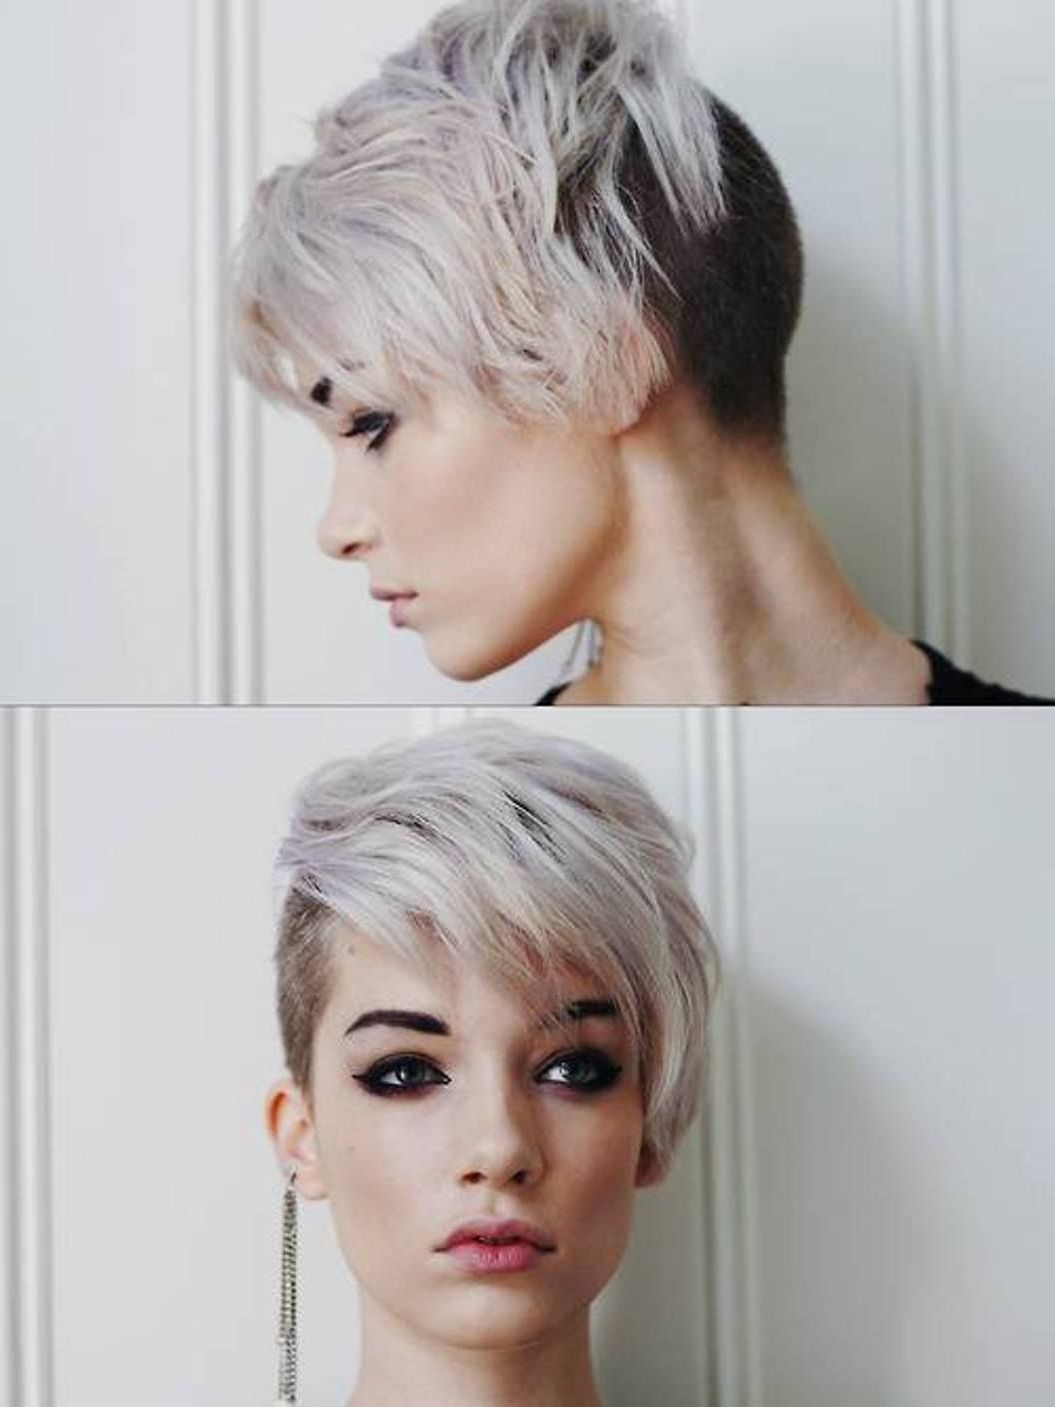 Womens Short Hair With Shaved Side 20 Shaved Hairstyles For Women With Short Haircuts With Shaved Side (View 8 of 25)